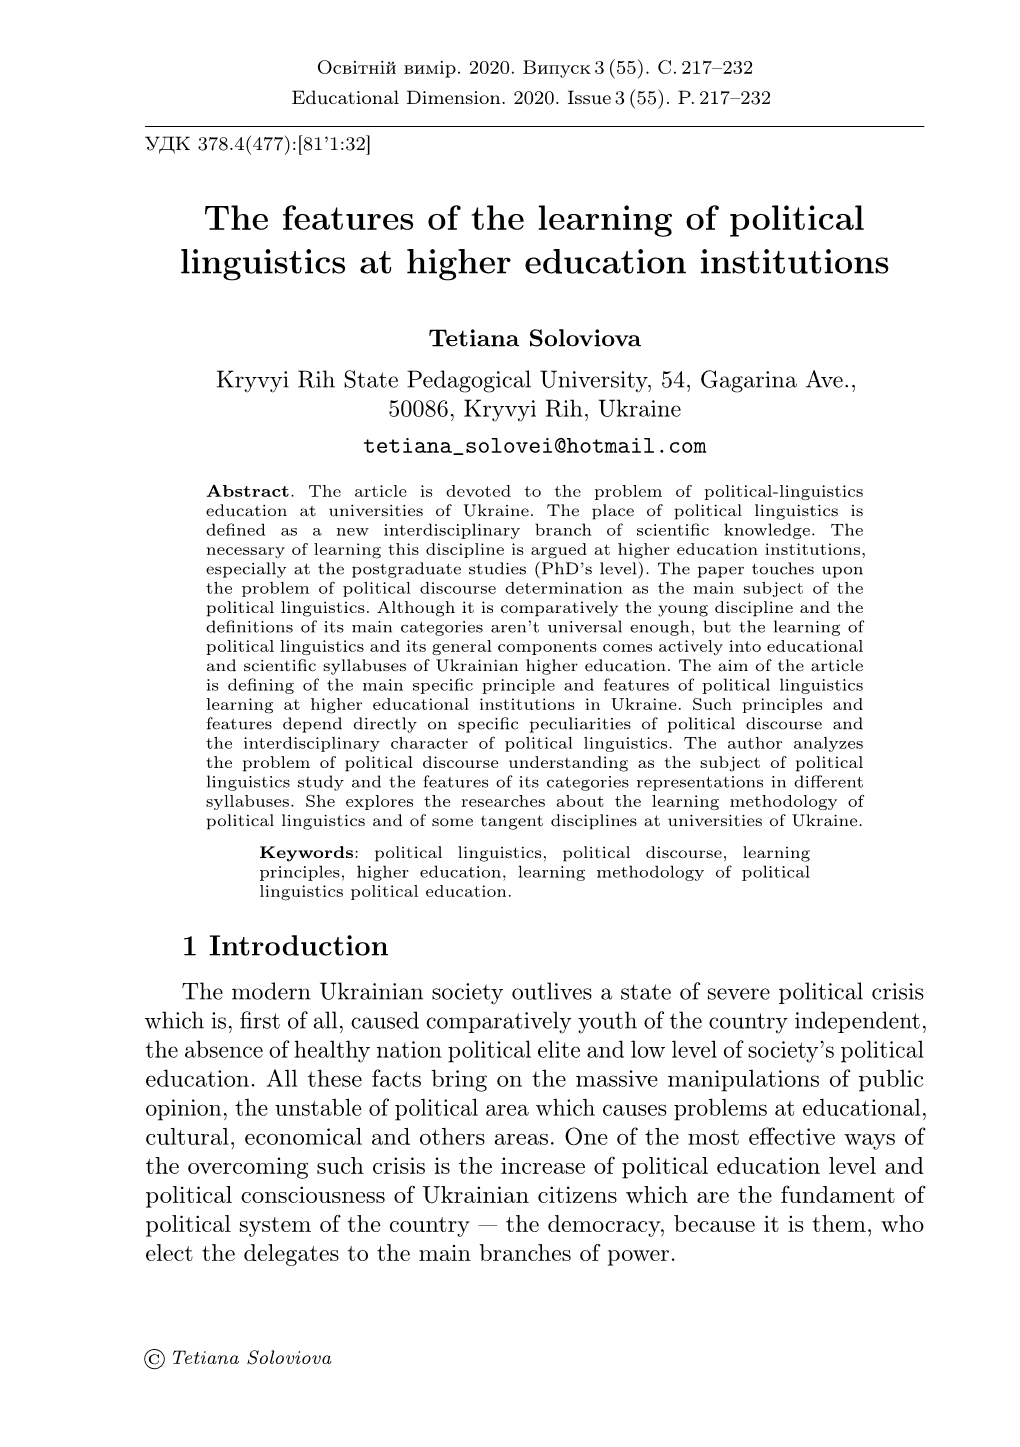 The Features of the Learning of Political Linguistics at Higher Education Institutions